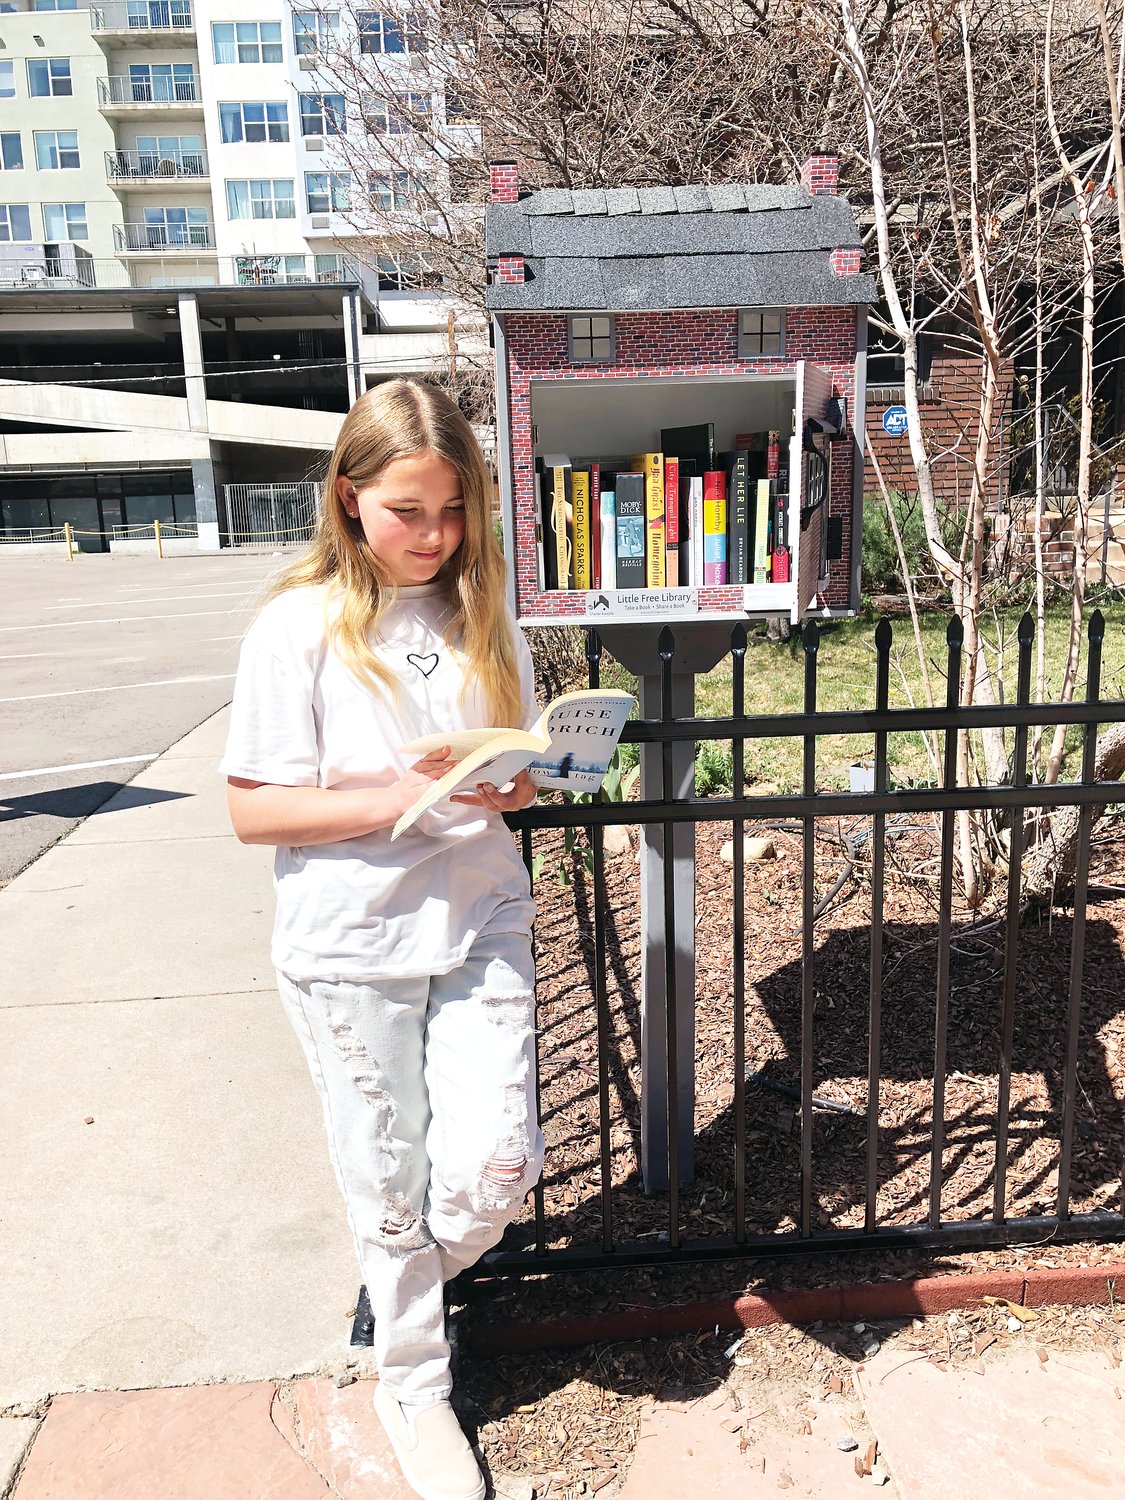 Maggie Carabello, 11, reads a book she found inside the new Little Free Library outside of the Denver Woman&rsquo;s Press Club at 1325 Logan St. in Denver&rsquo;s Capitol Hill neighborhood. Carabello and her grandfather were on their commute home to Virginia Village from the Denver Center of Performing Arts when Carabello saw the Little Free Library and asked her grandfather to stop so she could get a book for herself.